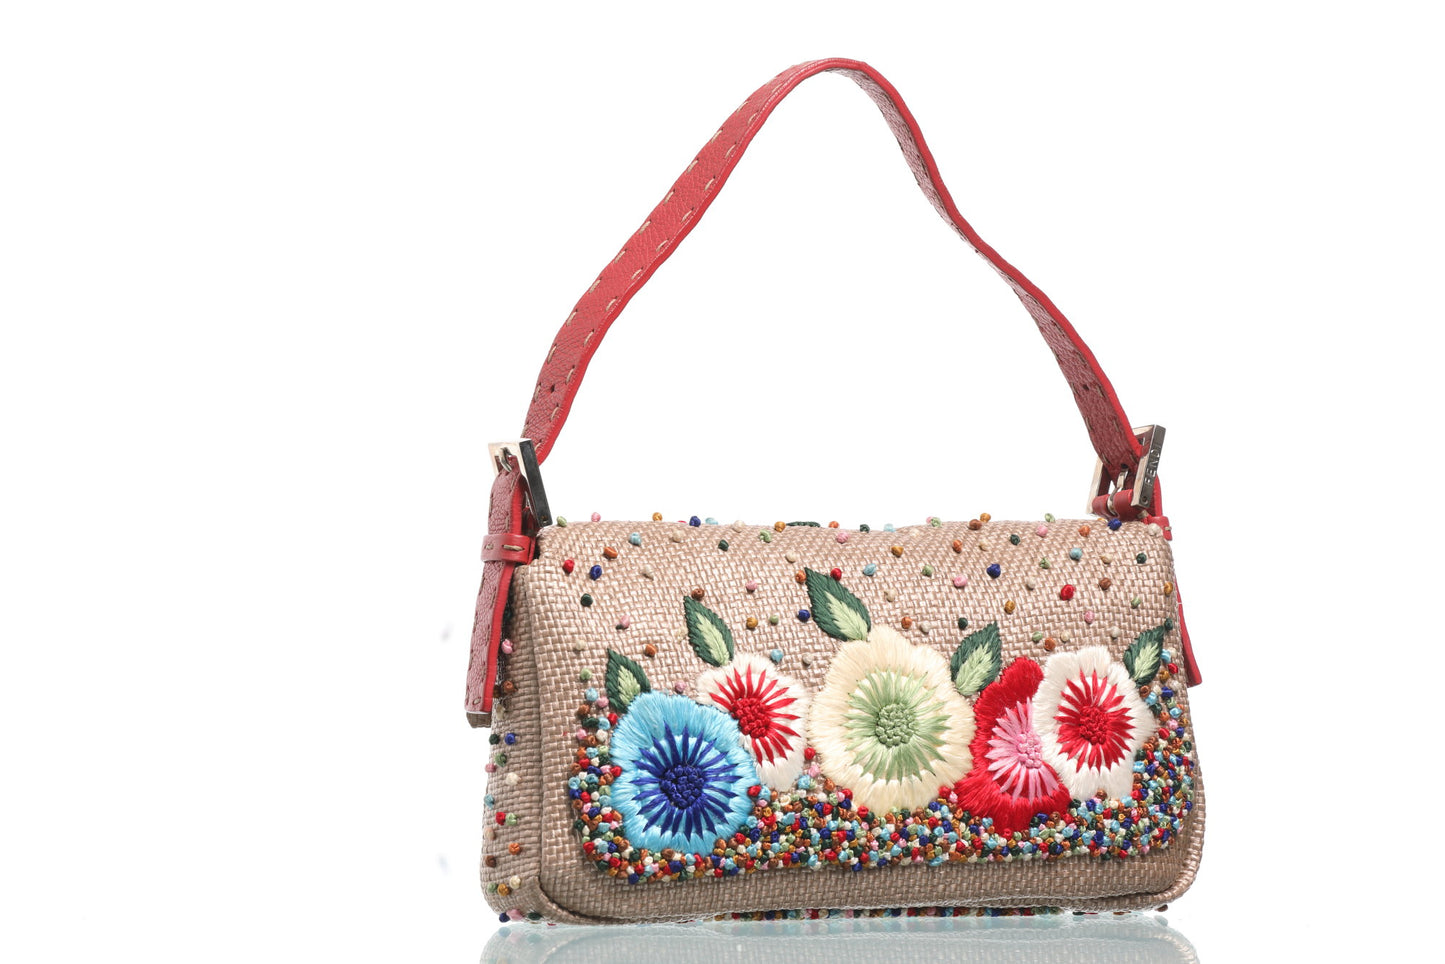 Fendi baguette with flower embroidery and multicolor beads